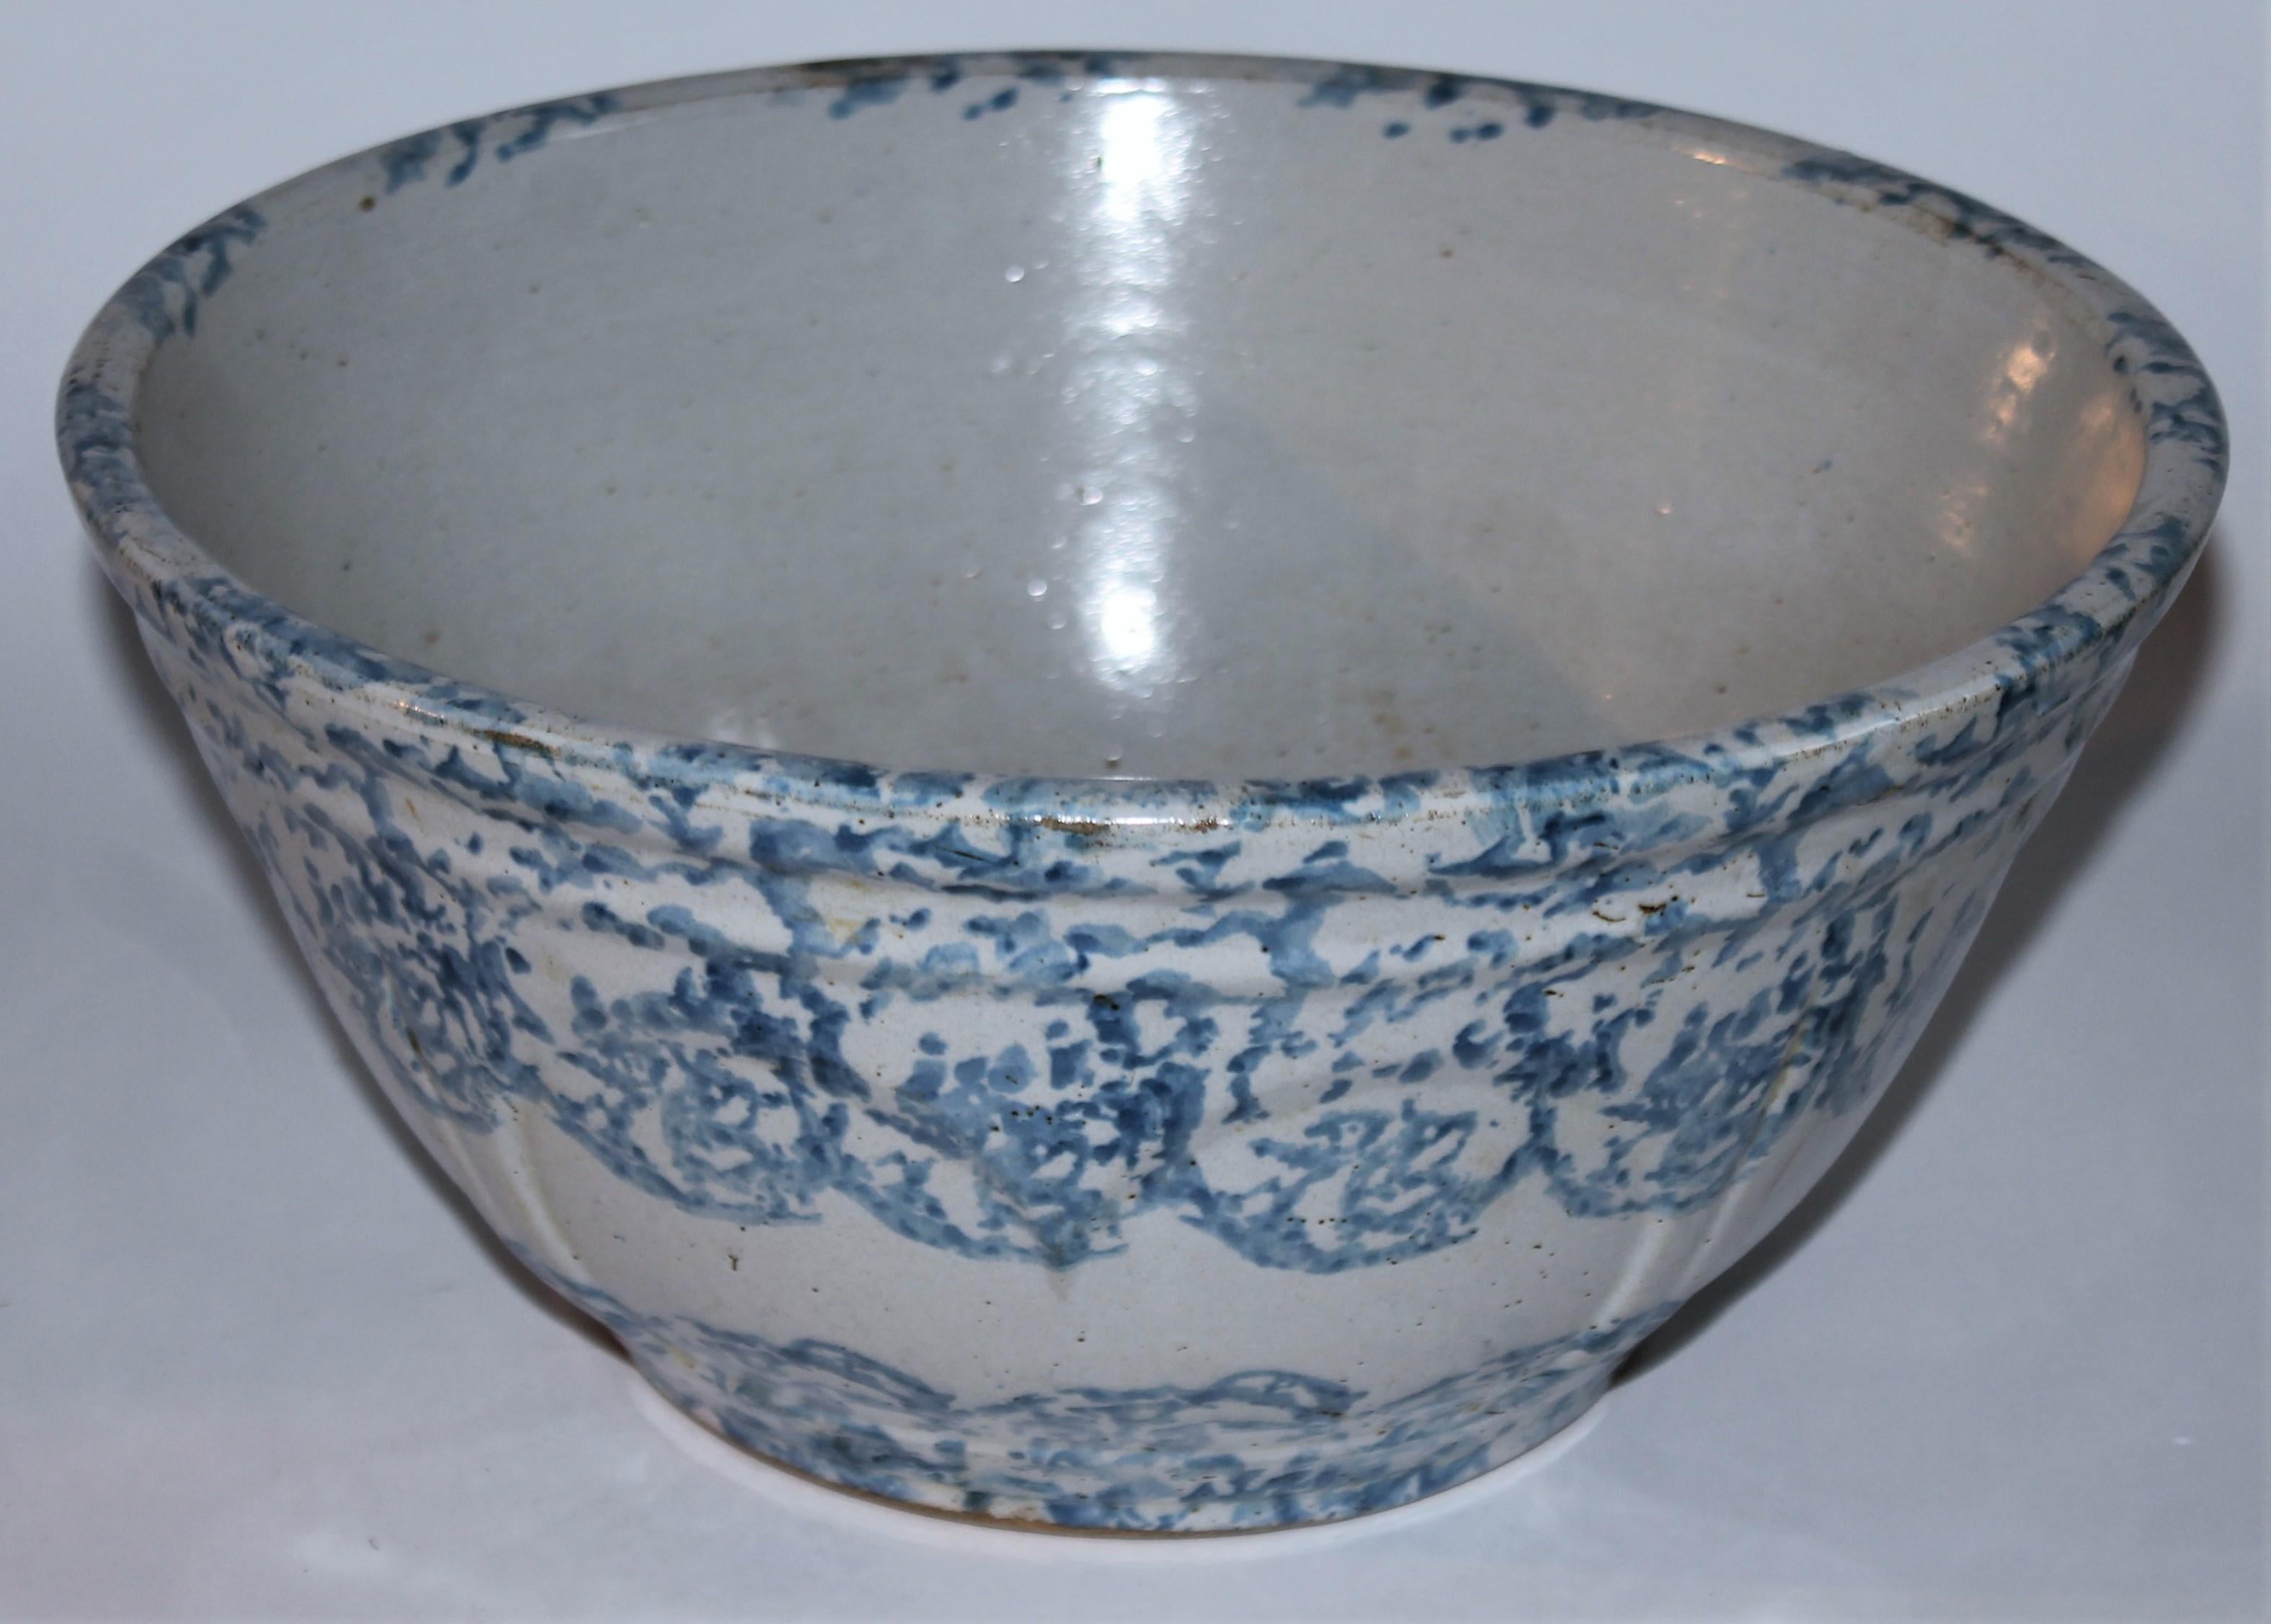 This fine large 19thc sponge ware pottery mixing or serving bowl is in fine condition. Its a nice lighter or sky blue color. Great for serving salads or fruit salad at the dinner table.